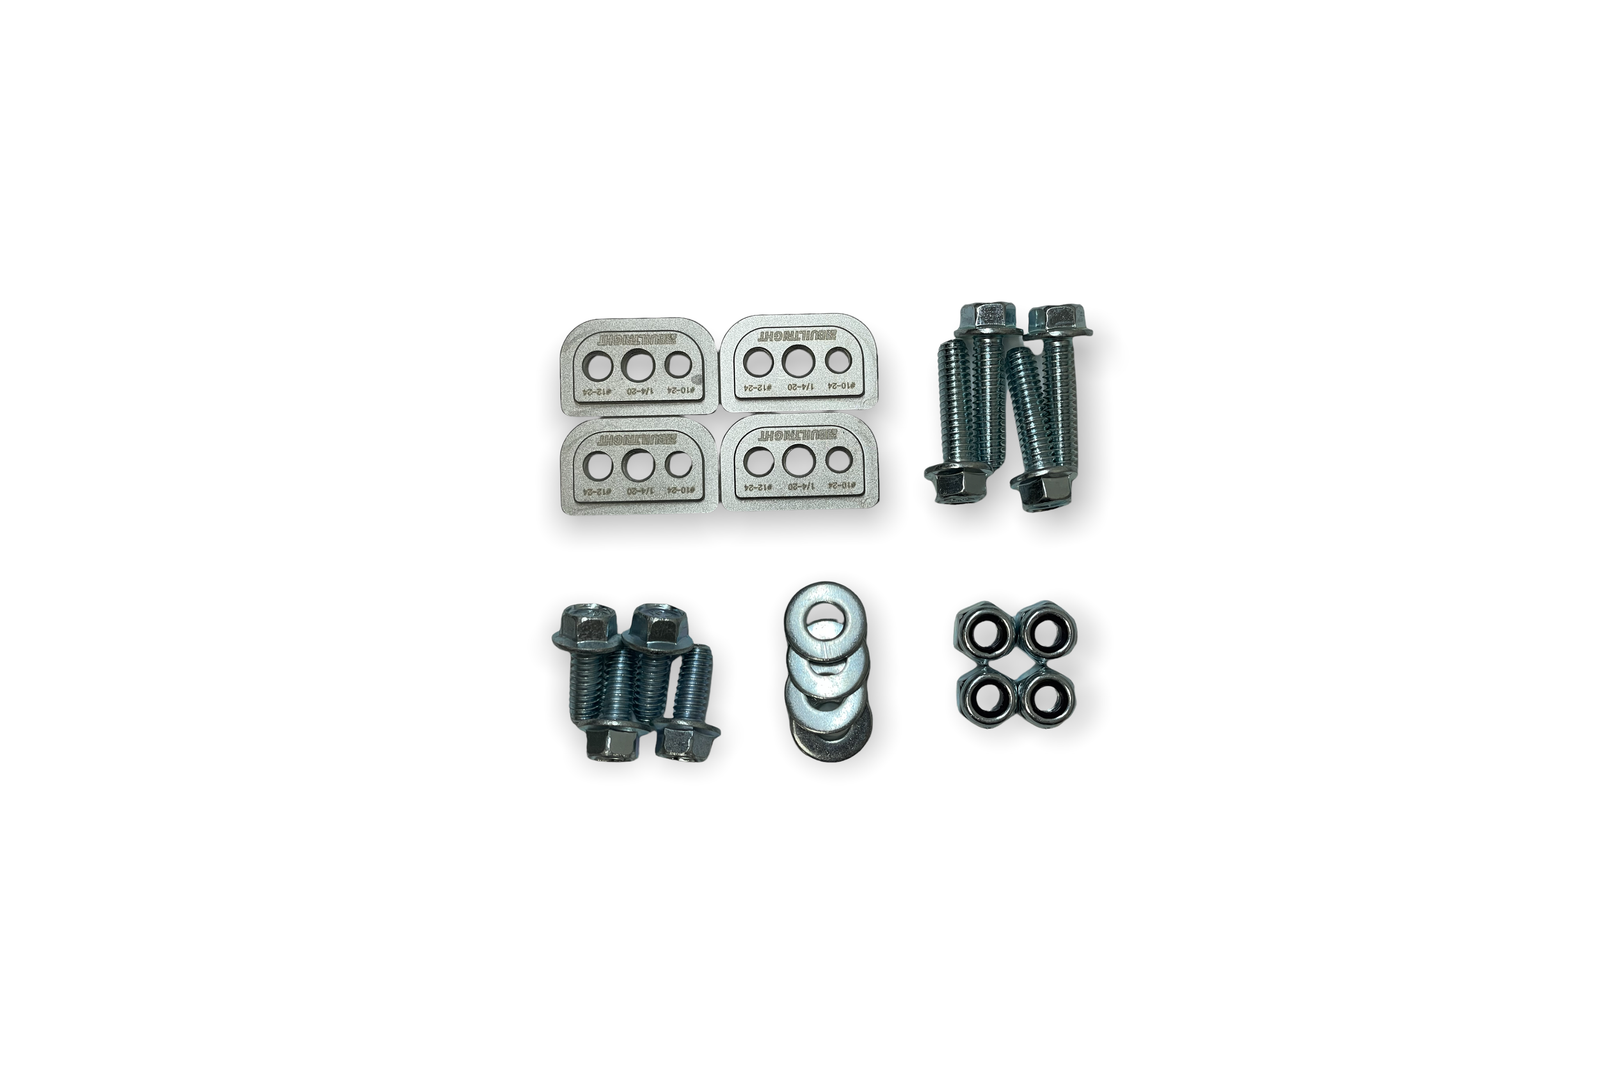 Included parts: 4x CNC Machined Stainless Steel MOLLE Nut, 4x 1/4-20 x 5/8” Flanged Bolt, 4x 1/4-20 x 1” Flanged Bolt, 4x 1/4” Washer, 4x 1/4"-20 Locking Nut